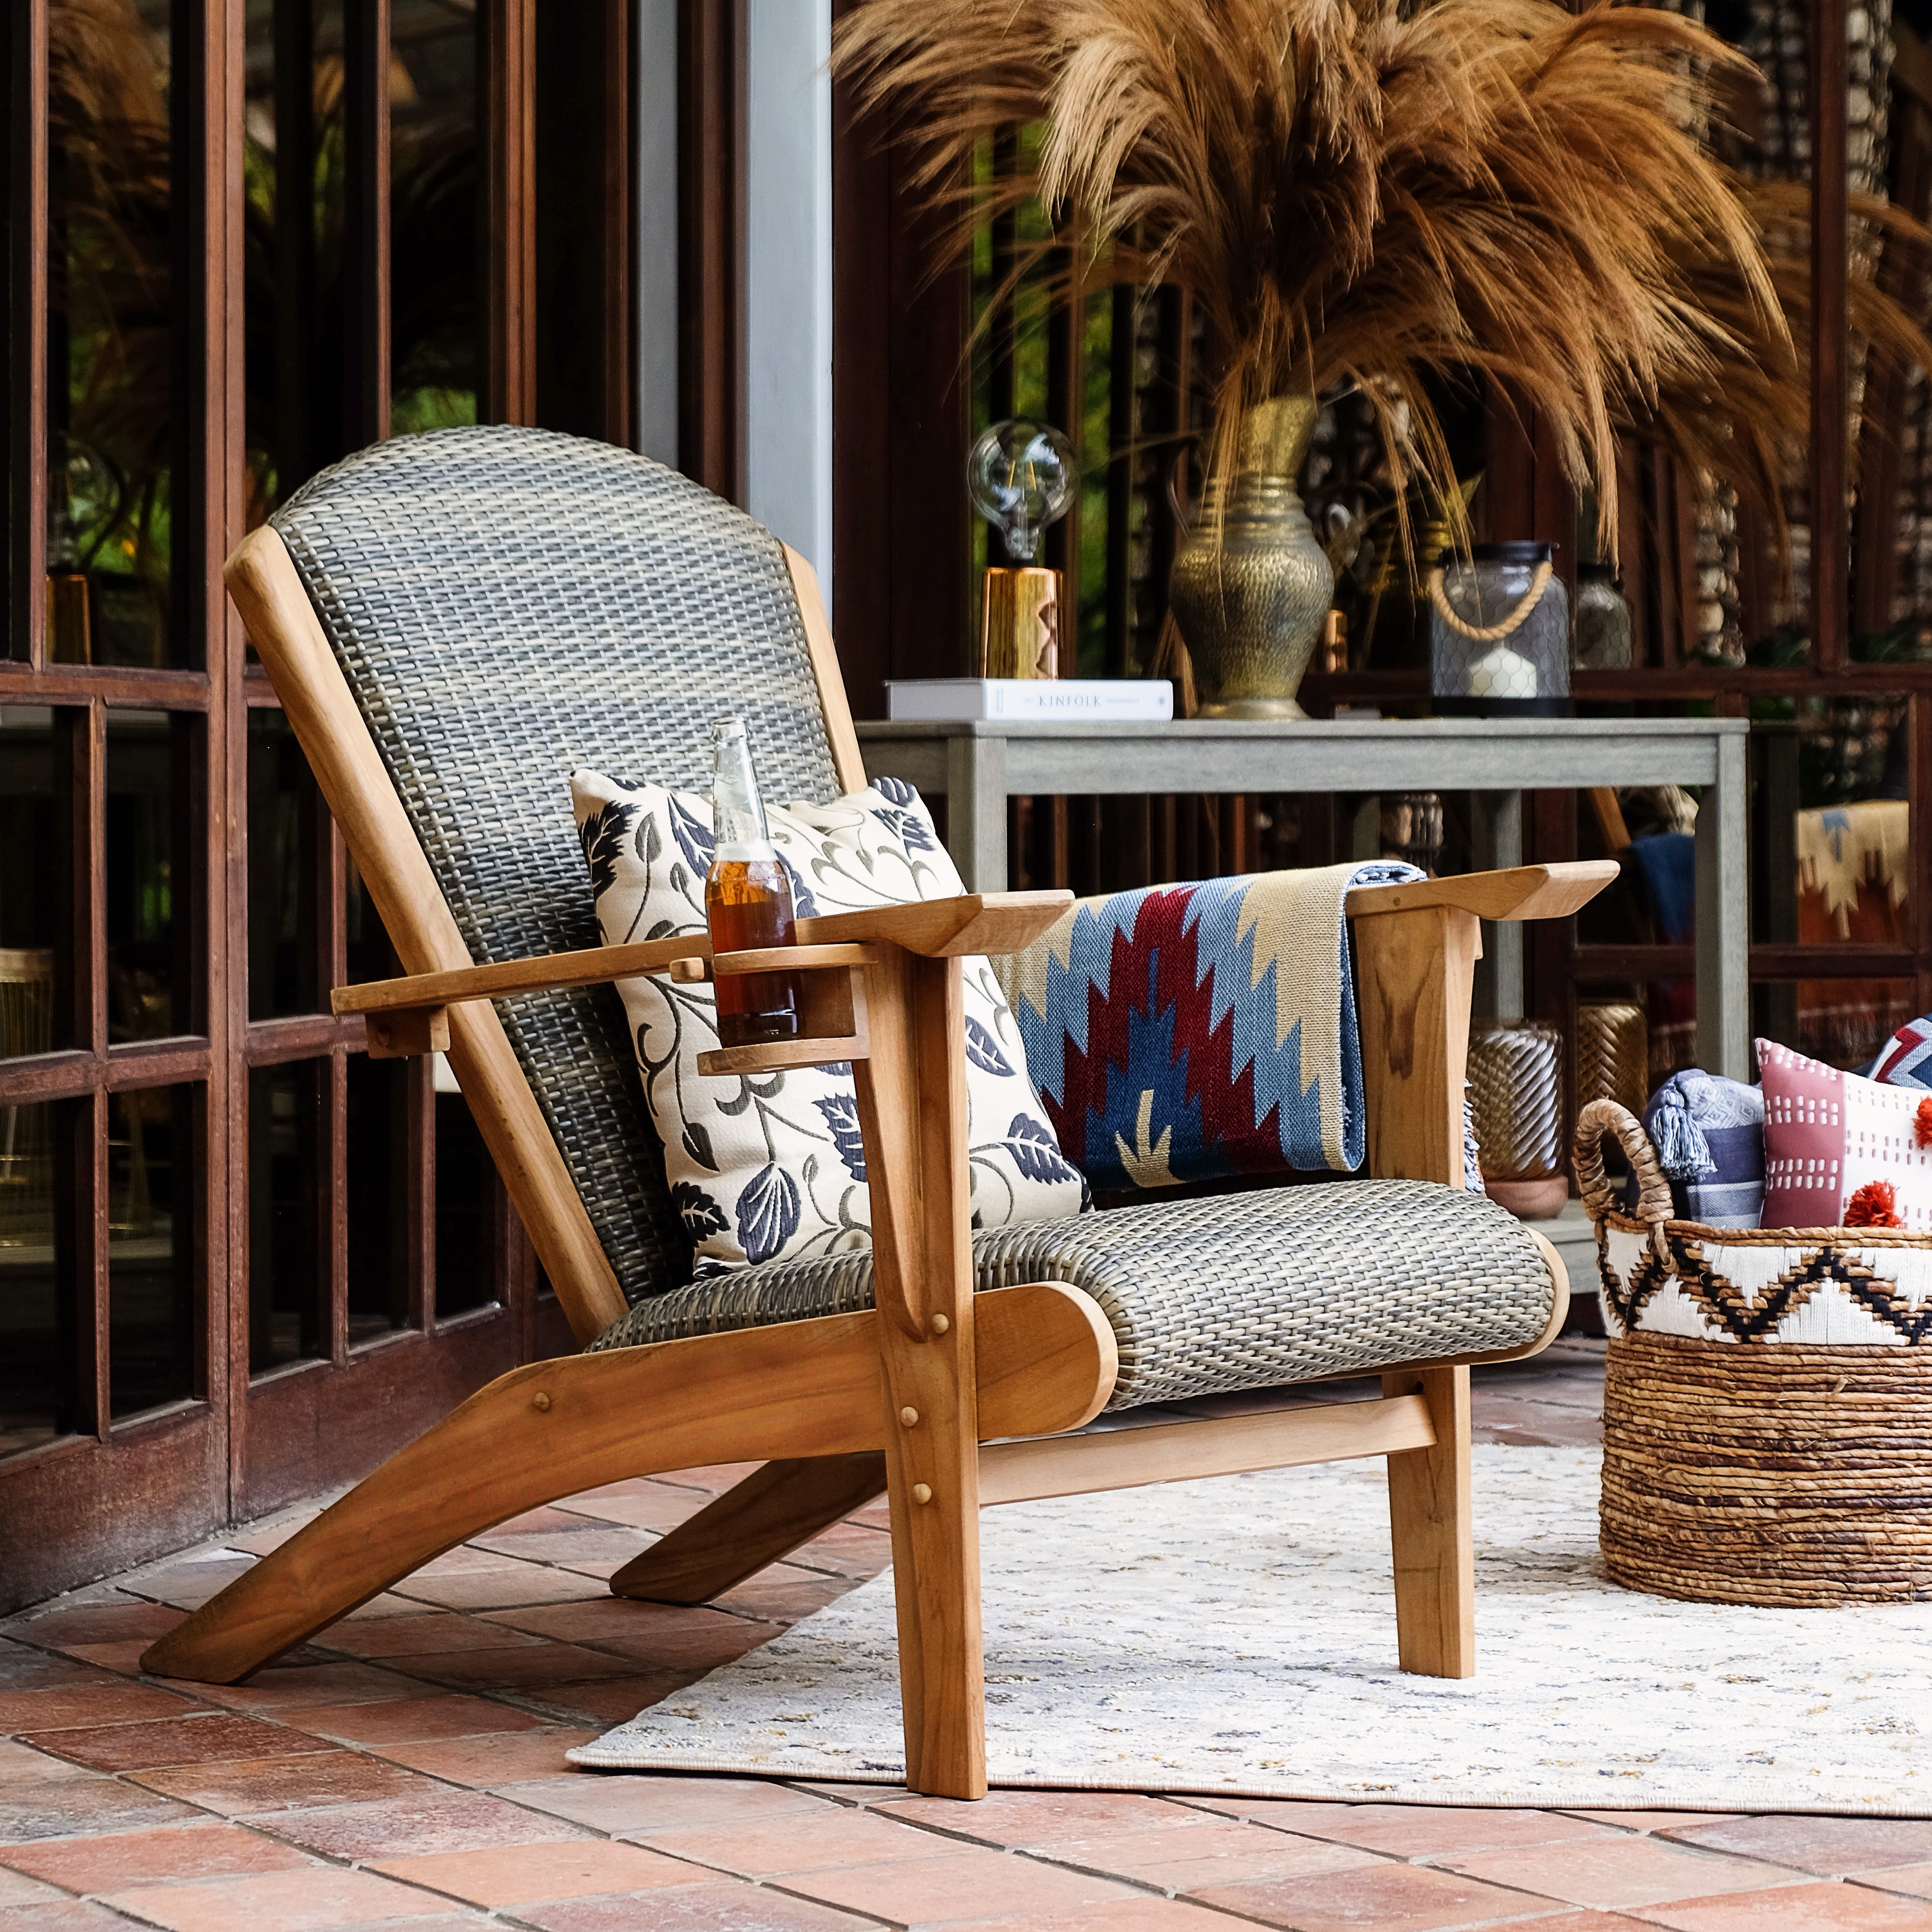 https://ak1.ostkcdn.com/images/products/is/images/direct/f1d84ab415ce72bd0c4a1b6e4f451bac70e12f0c/Cambridge-Casual-Auburn-Upholstered-Teak-Outdoor-Lounge-Chair.jpg